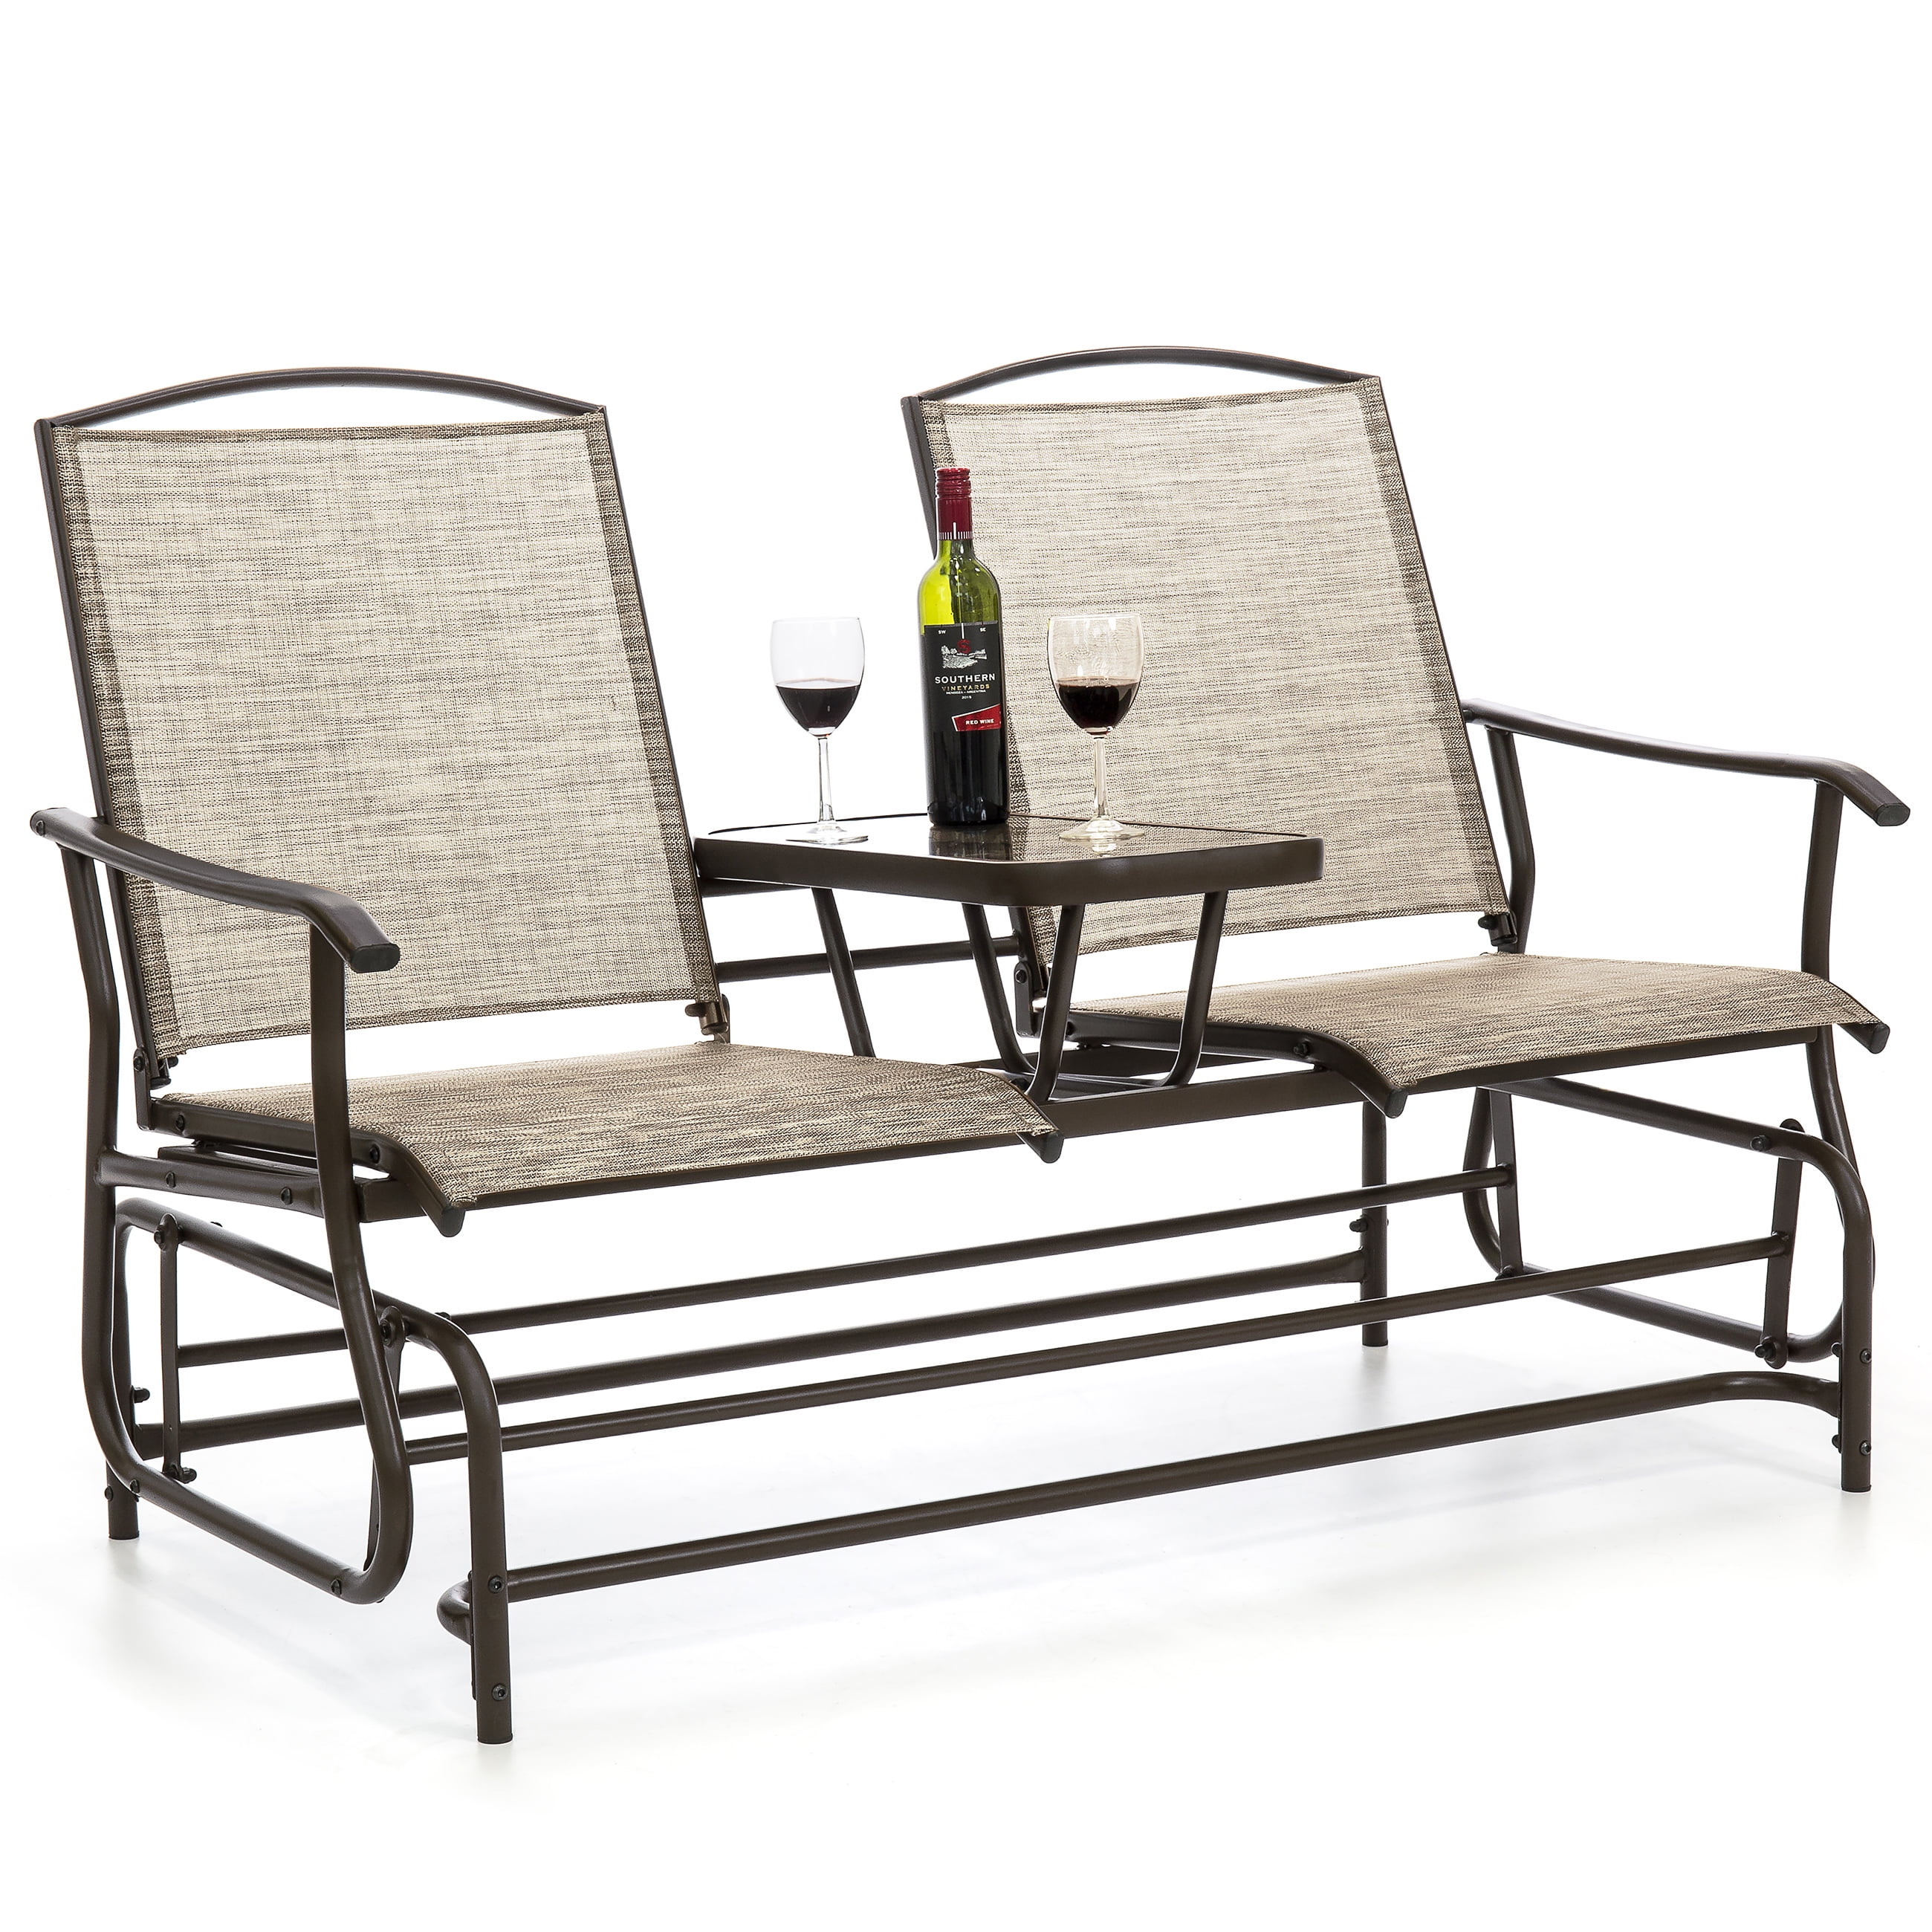 Festnight 2 Person Outdoor Patio Double Glider Chair with Center Coffee Table Mesh Fabric 